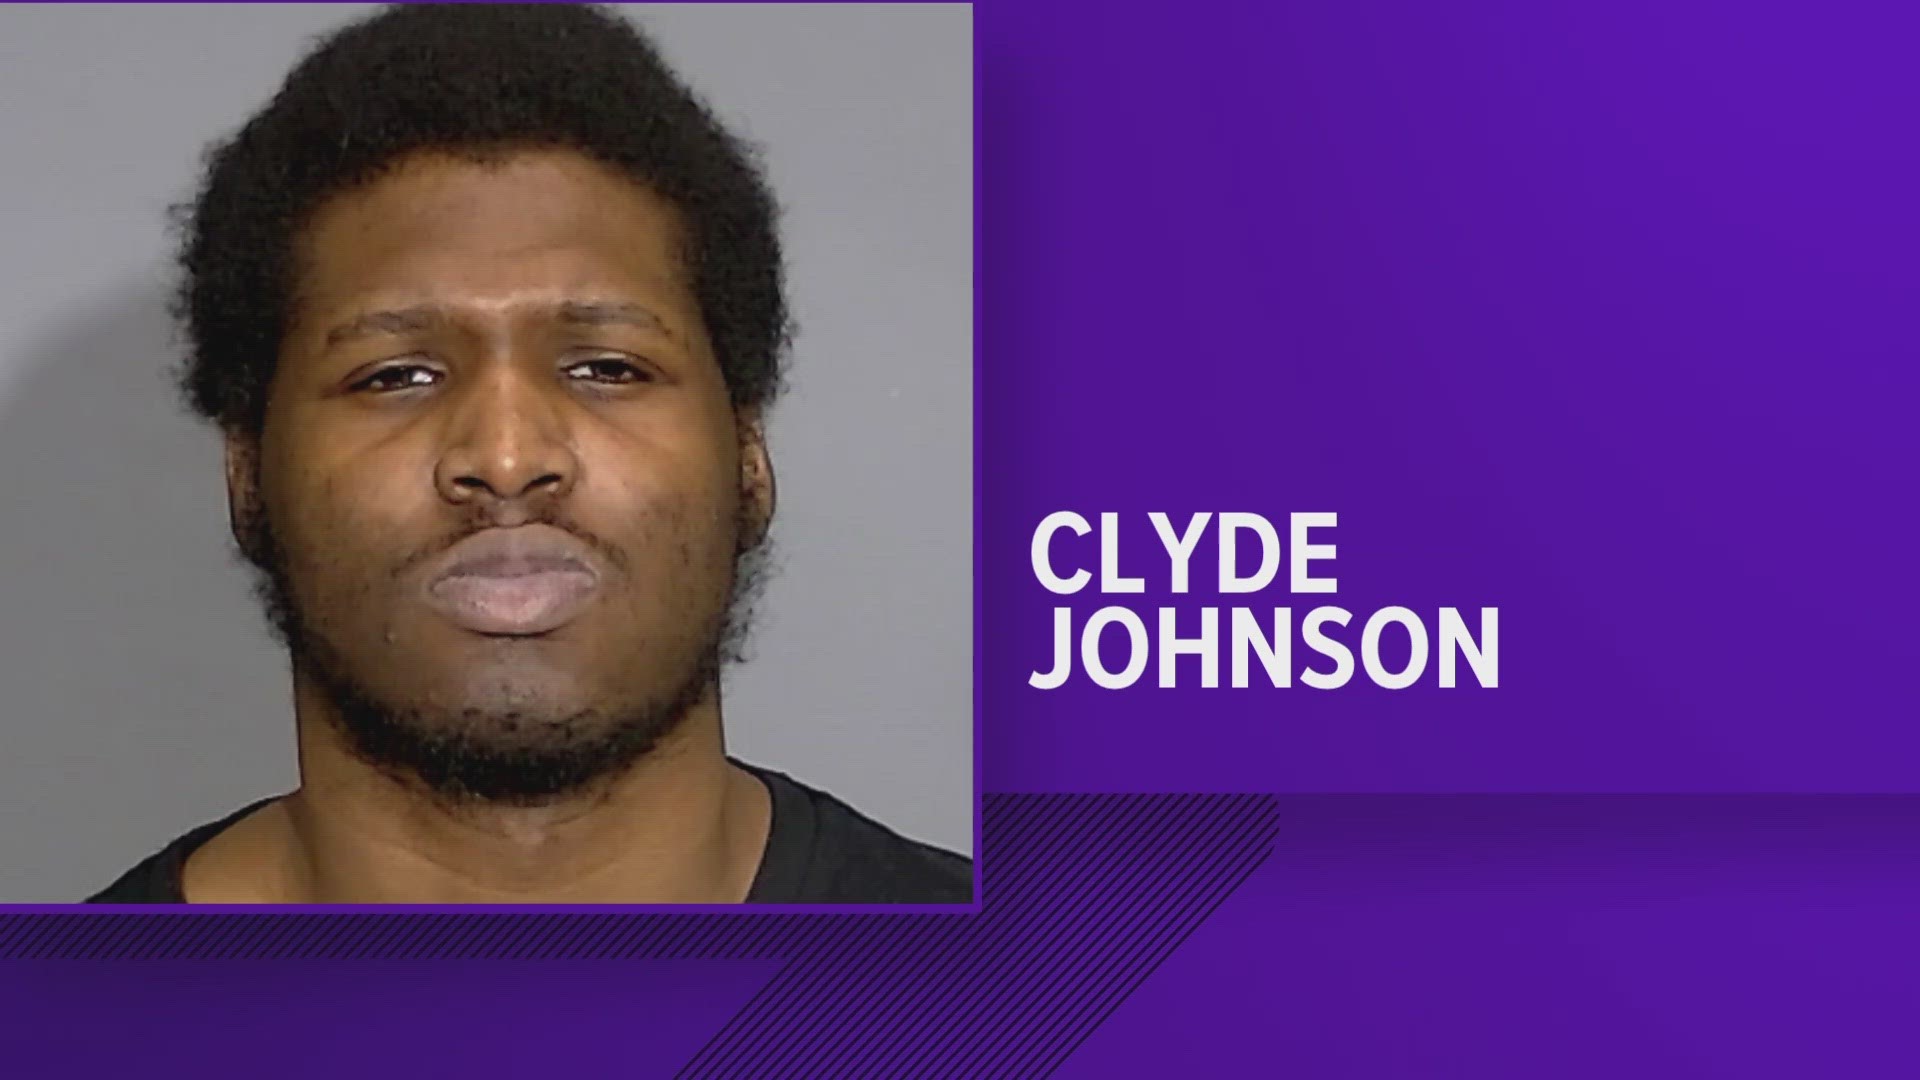 Officers arrested Clyde Johnson today. He faces charges of voluntary manslaughter aggravated battery and battery by means of a deadly weapon.